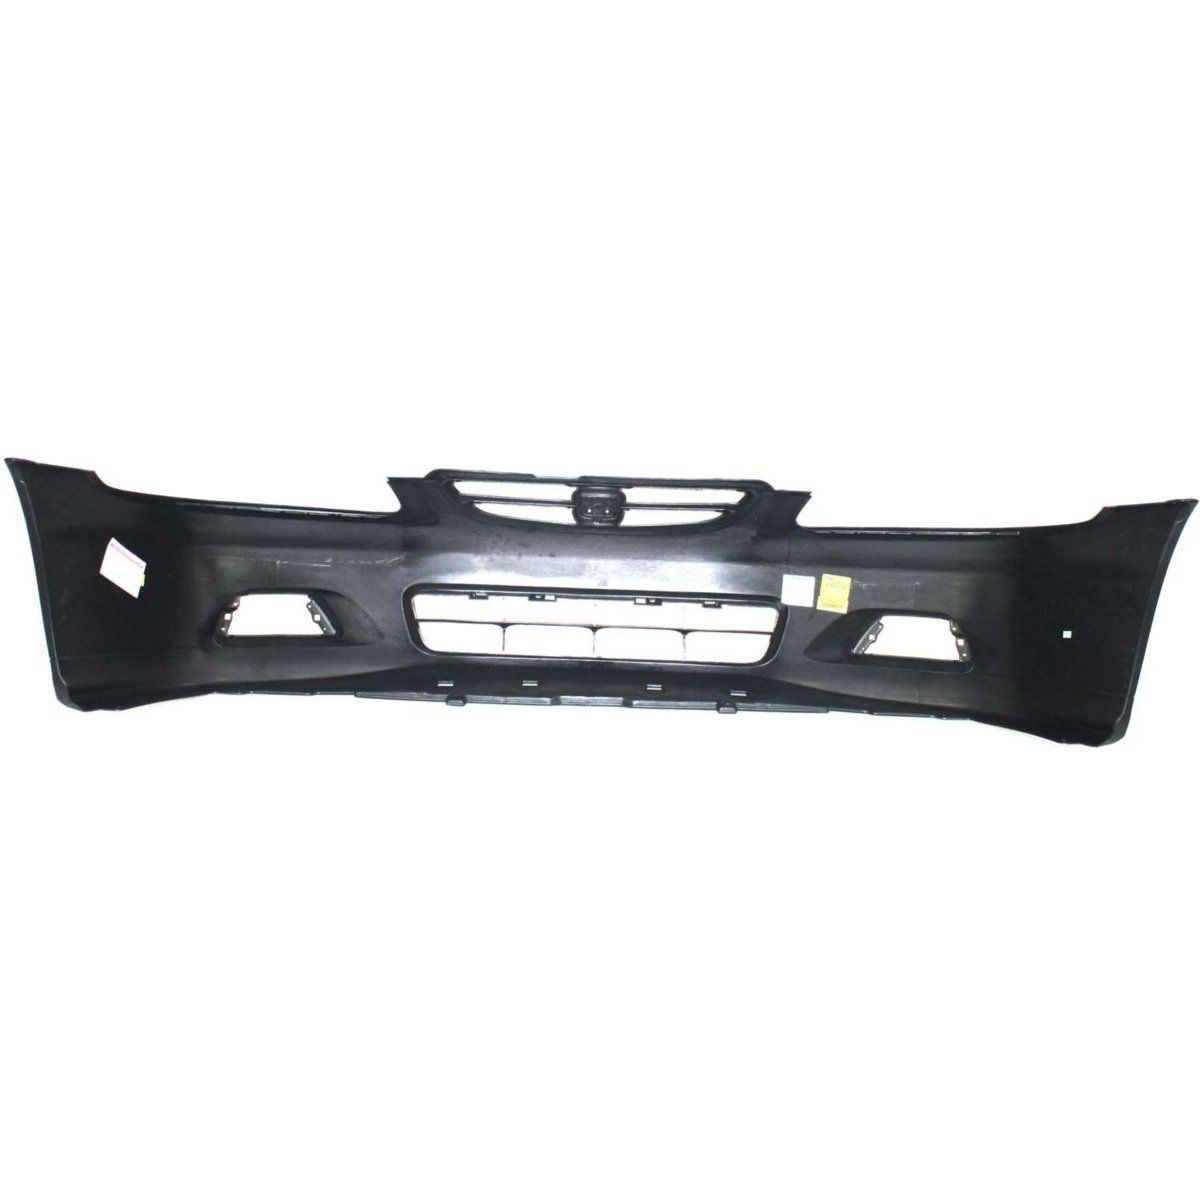 2001-2002 HONDA ACCORD Front Bumper Cover 2dr coupe Painted to Match